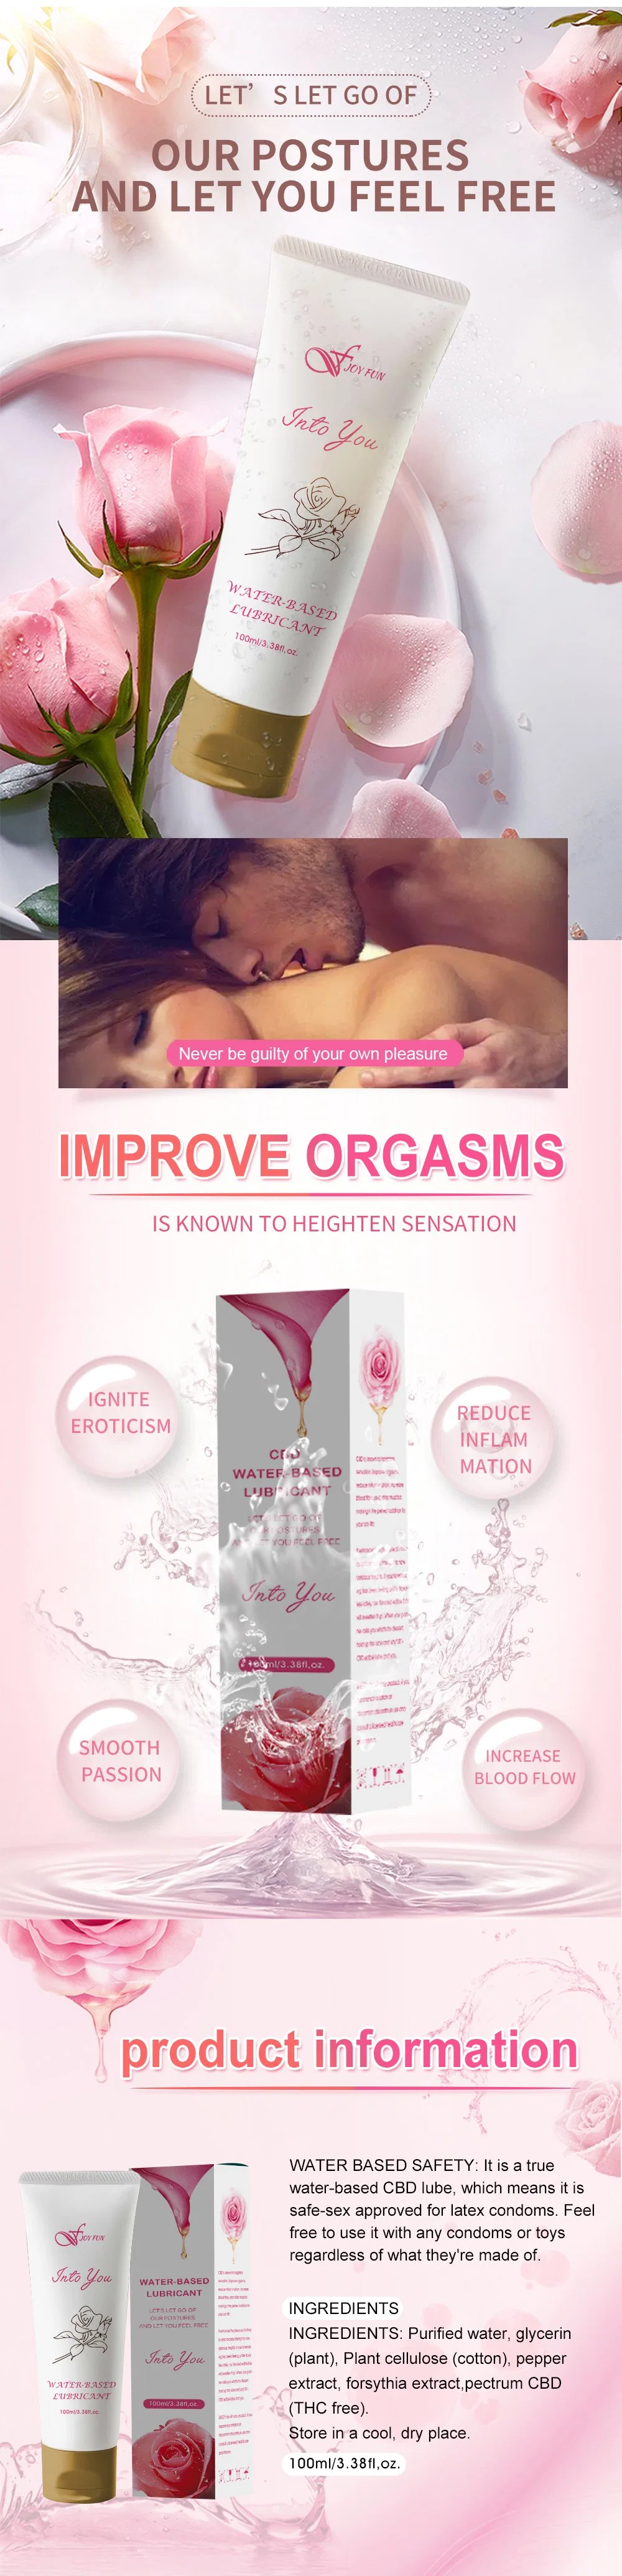 Water Based Strawberry Flavor Vaginal Lubricant Gel Sex Products Lubrication Warm or Cool